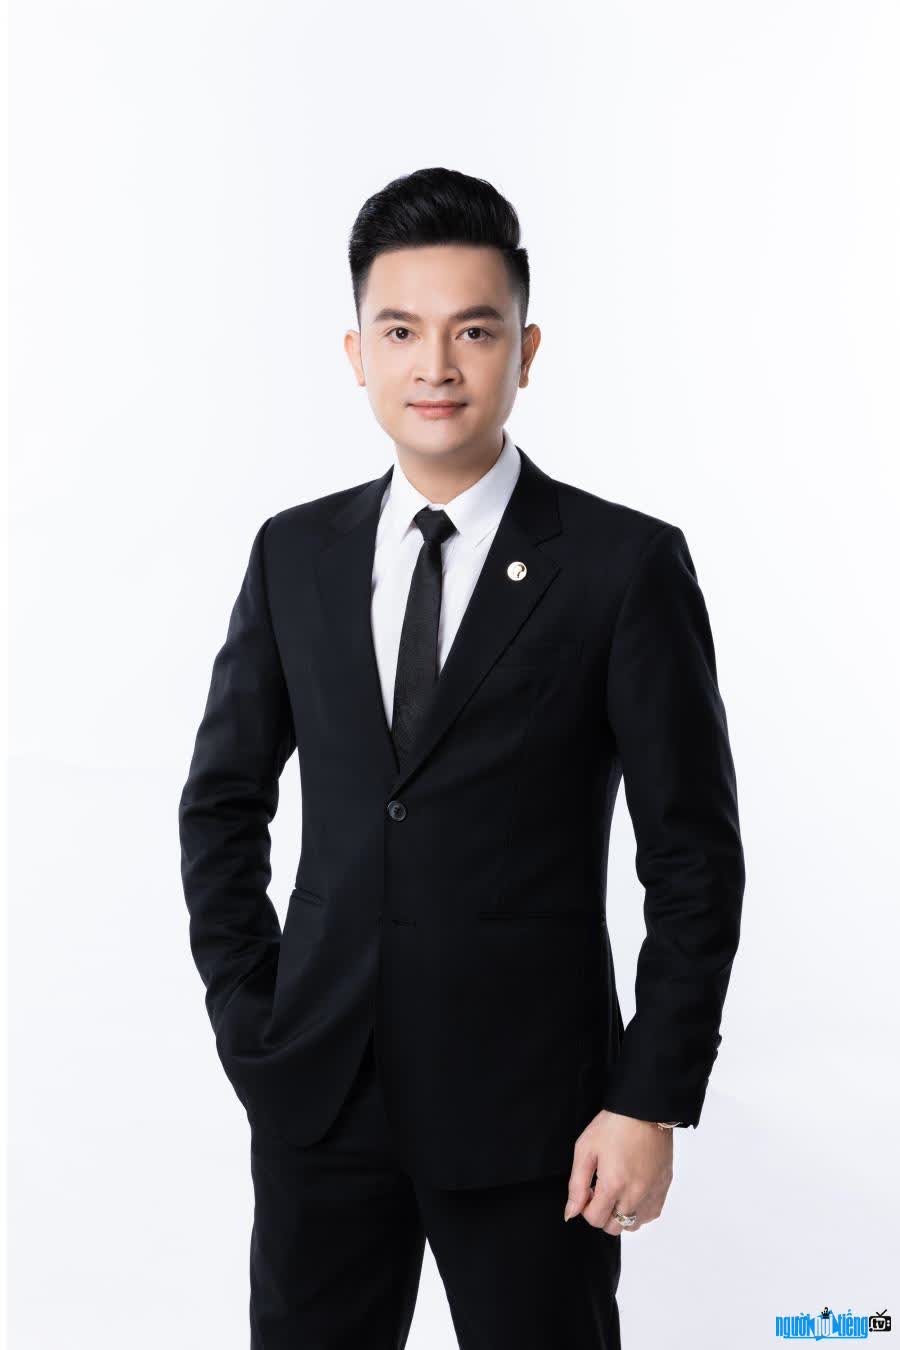  actor Hoang Gia Cuong handsome and elegant